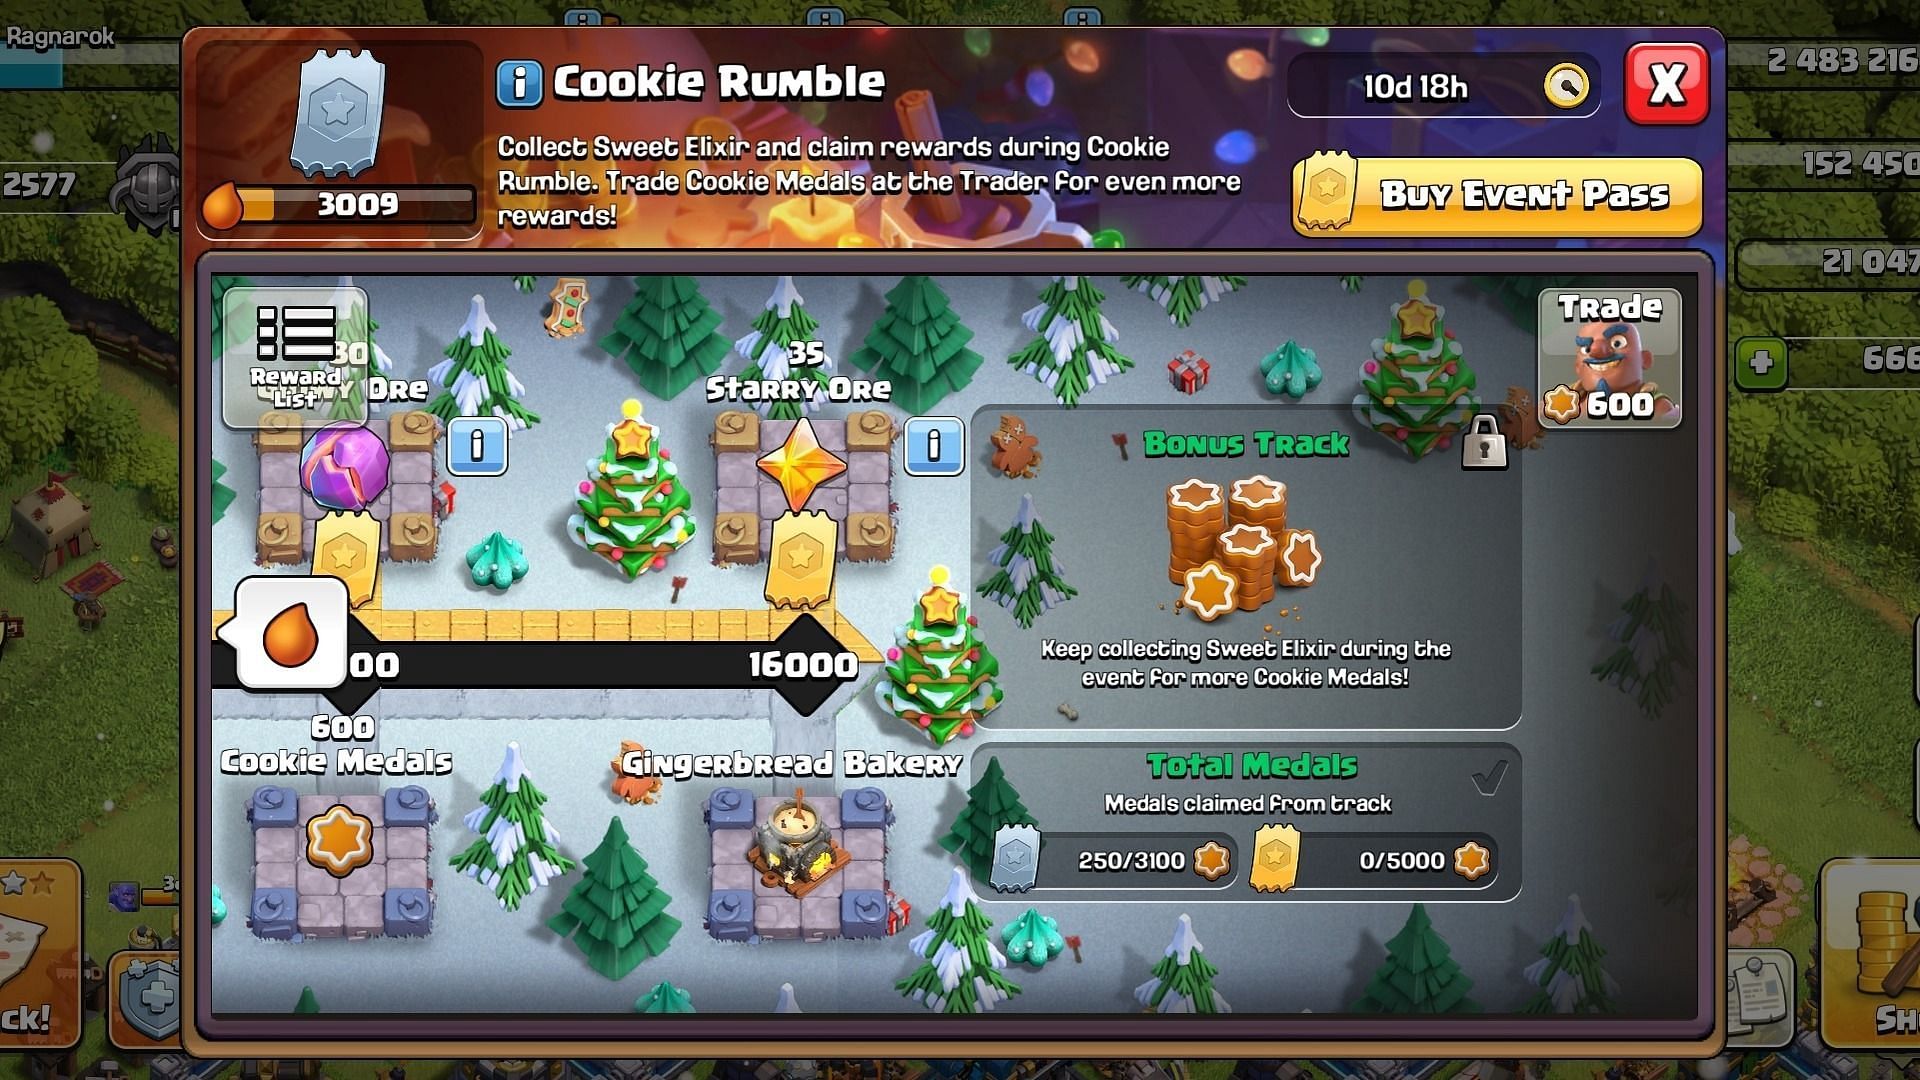 Clash of Clans Cookie Rumble (Image via Supercell)